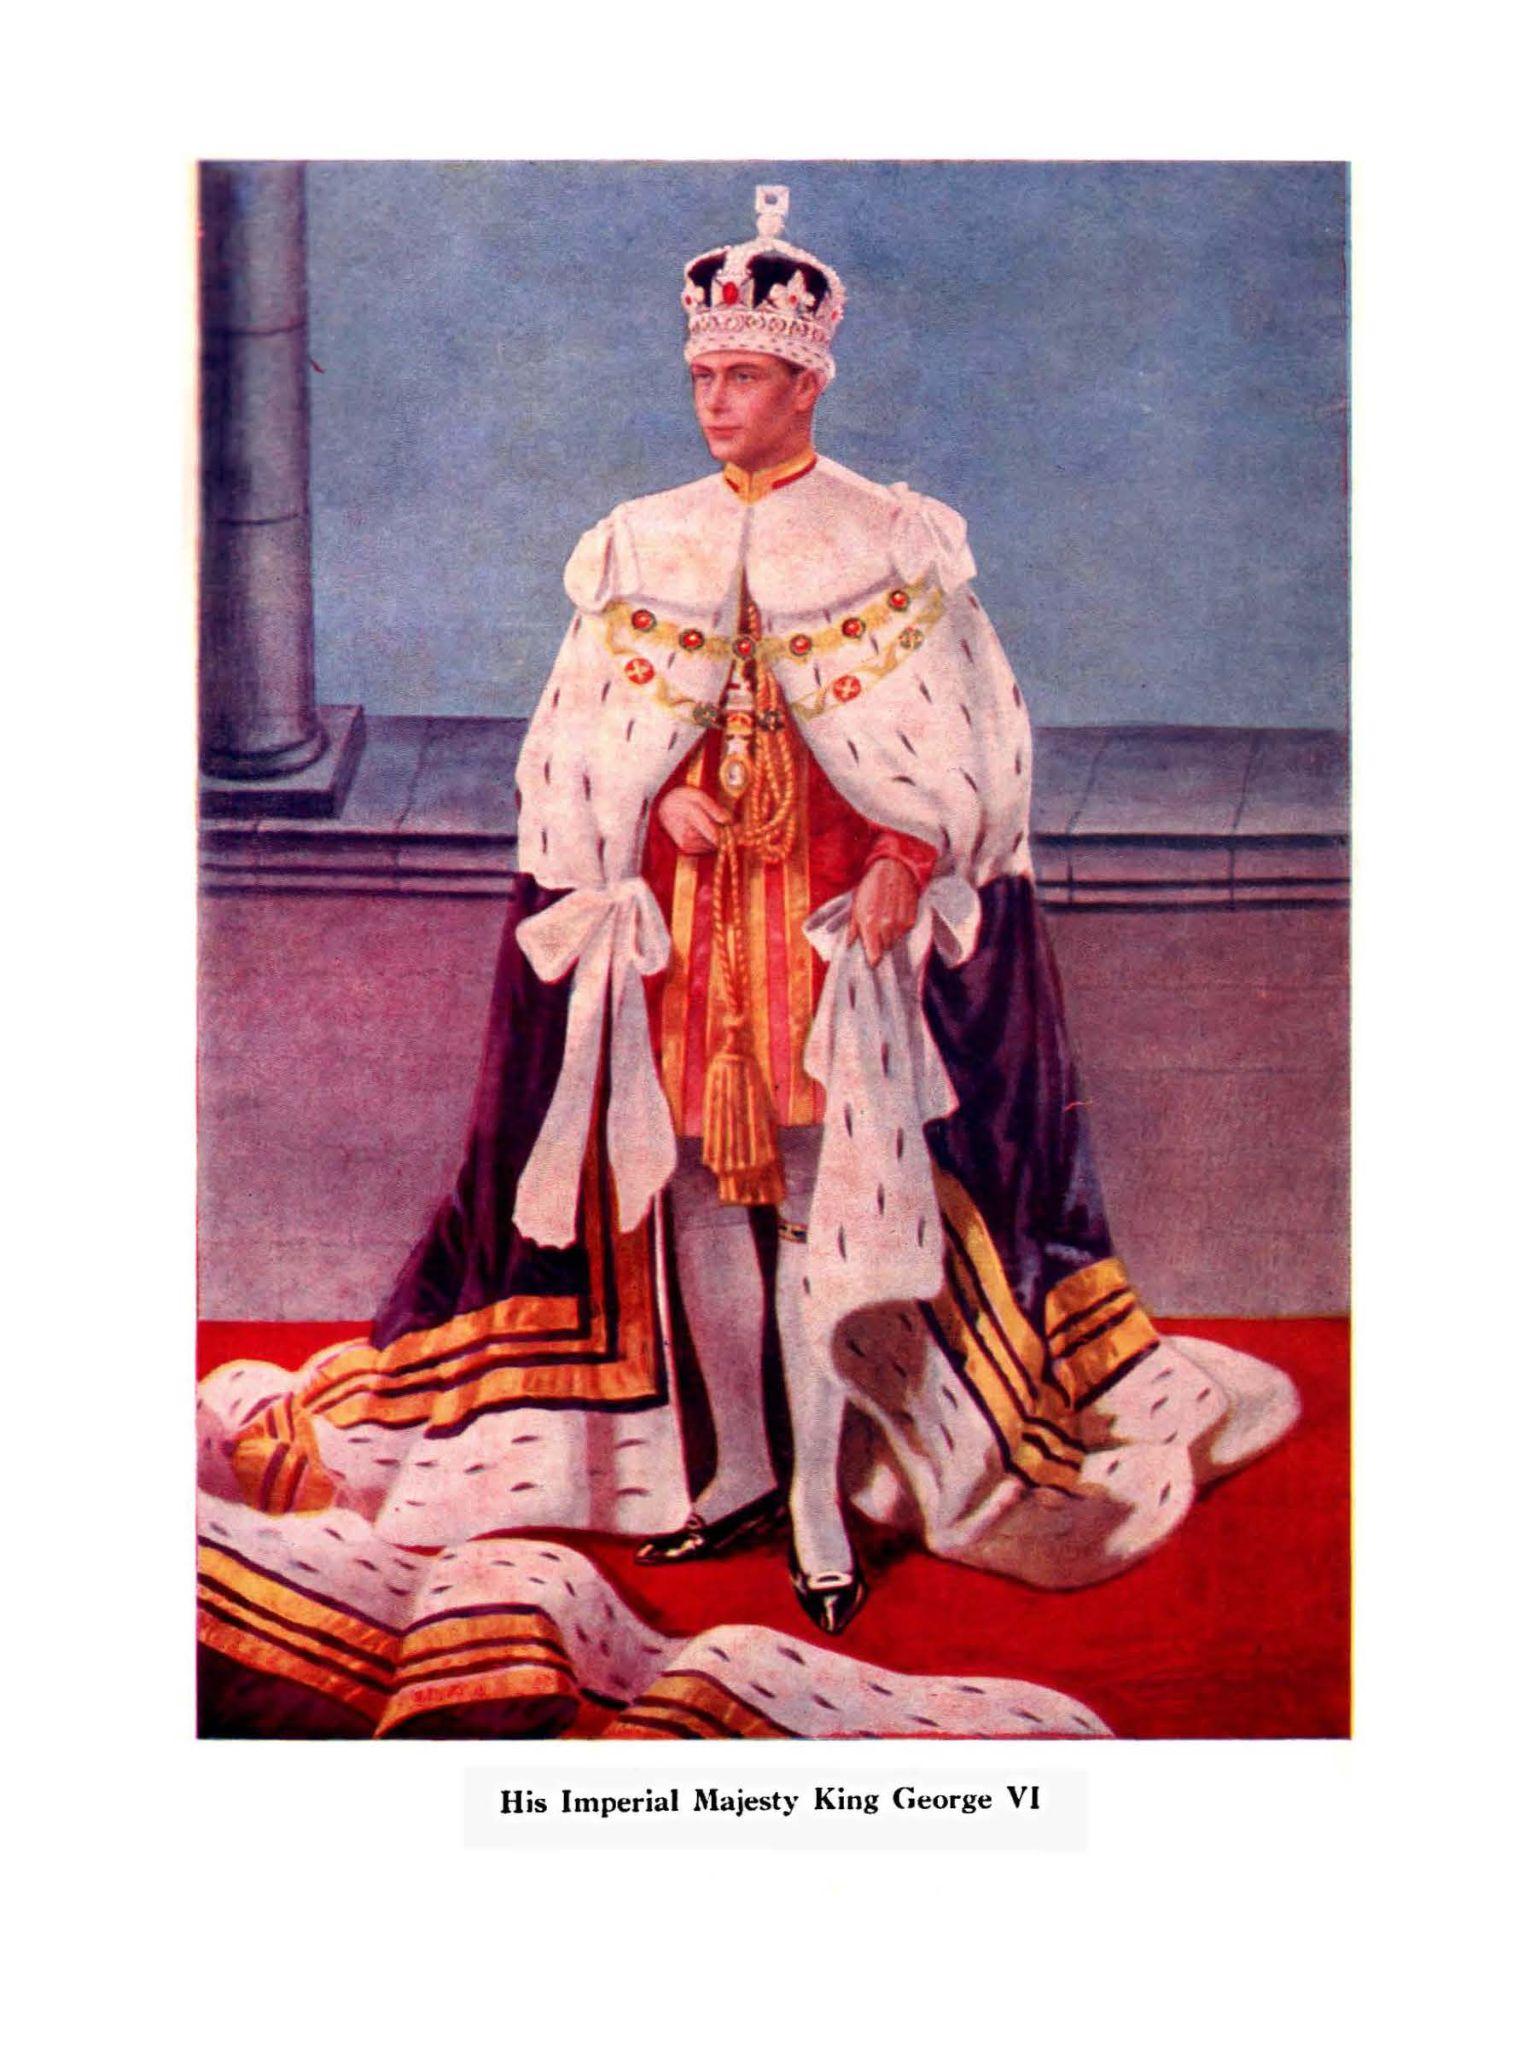 His Imperial Majesty King George VI.